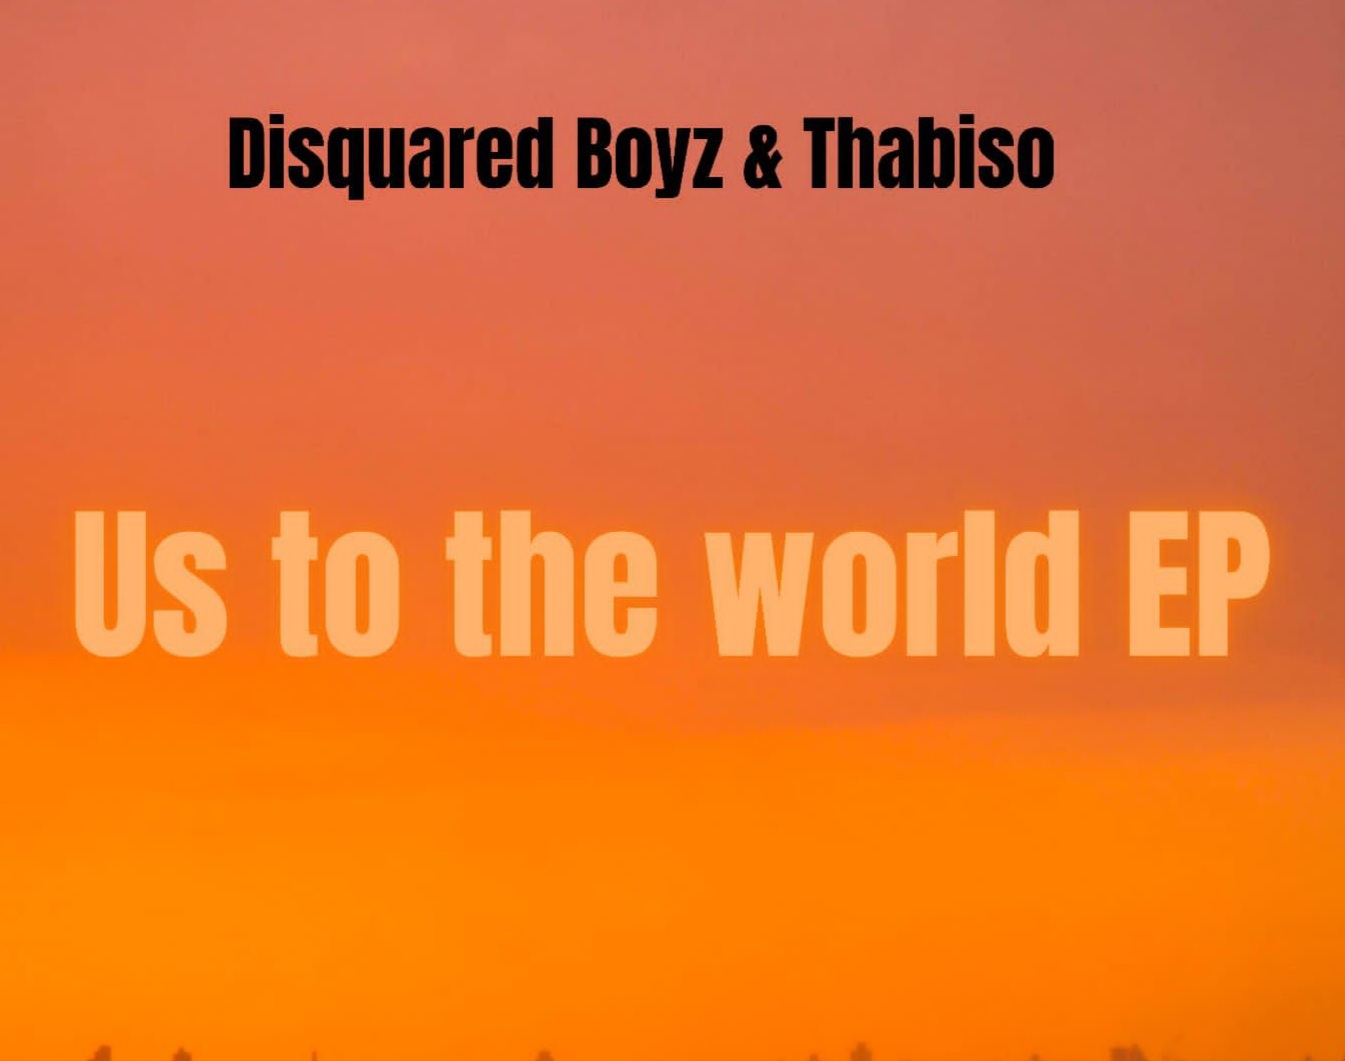 Us to the world - Disquared Boyz & Thabiso